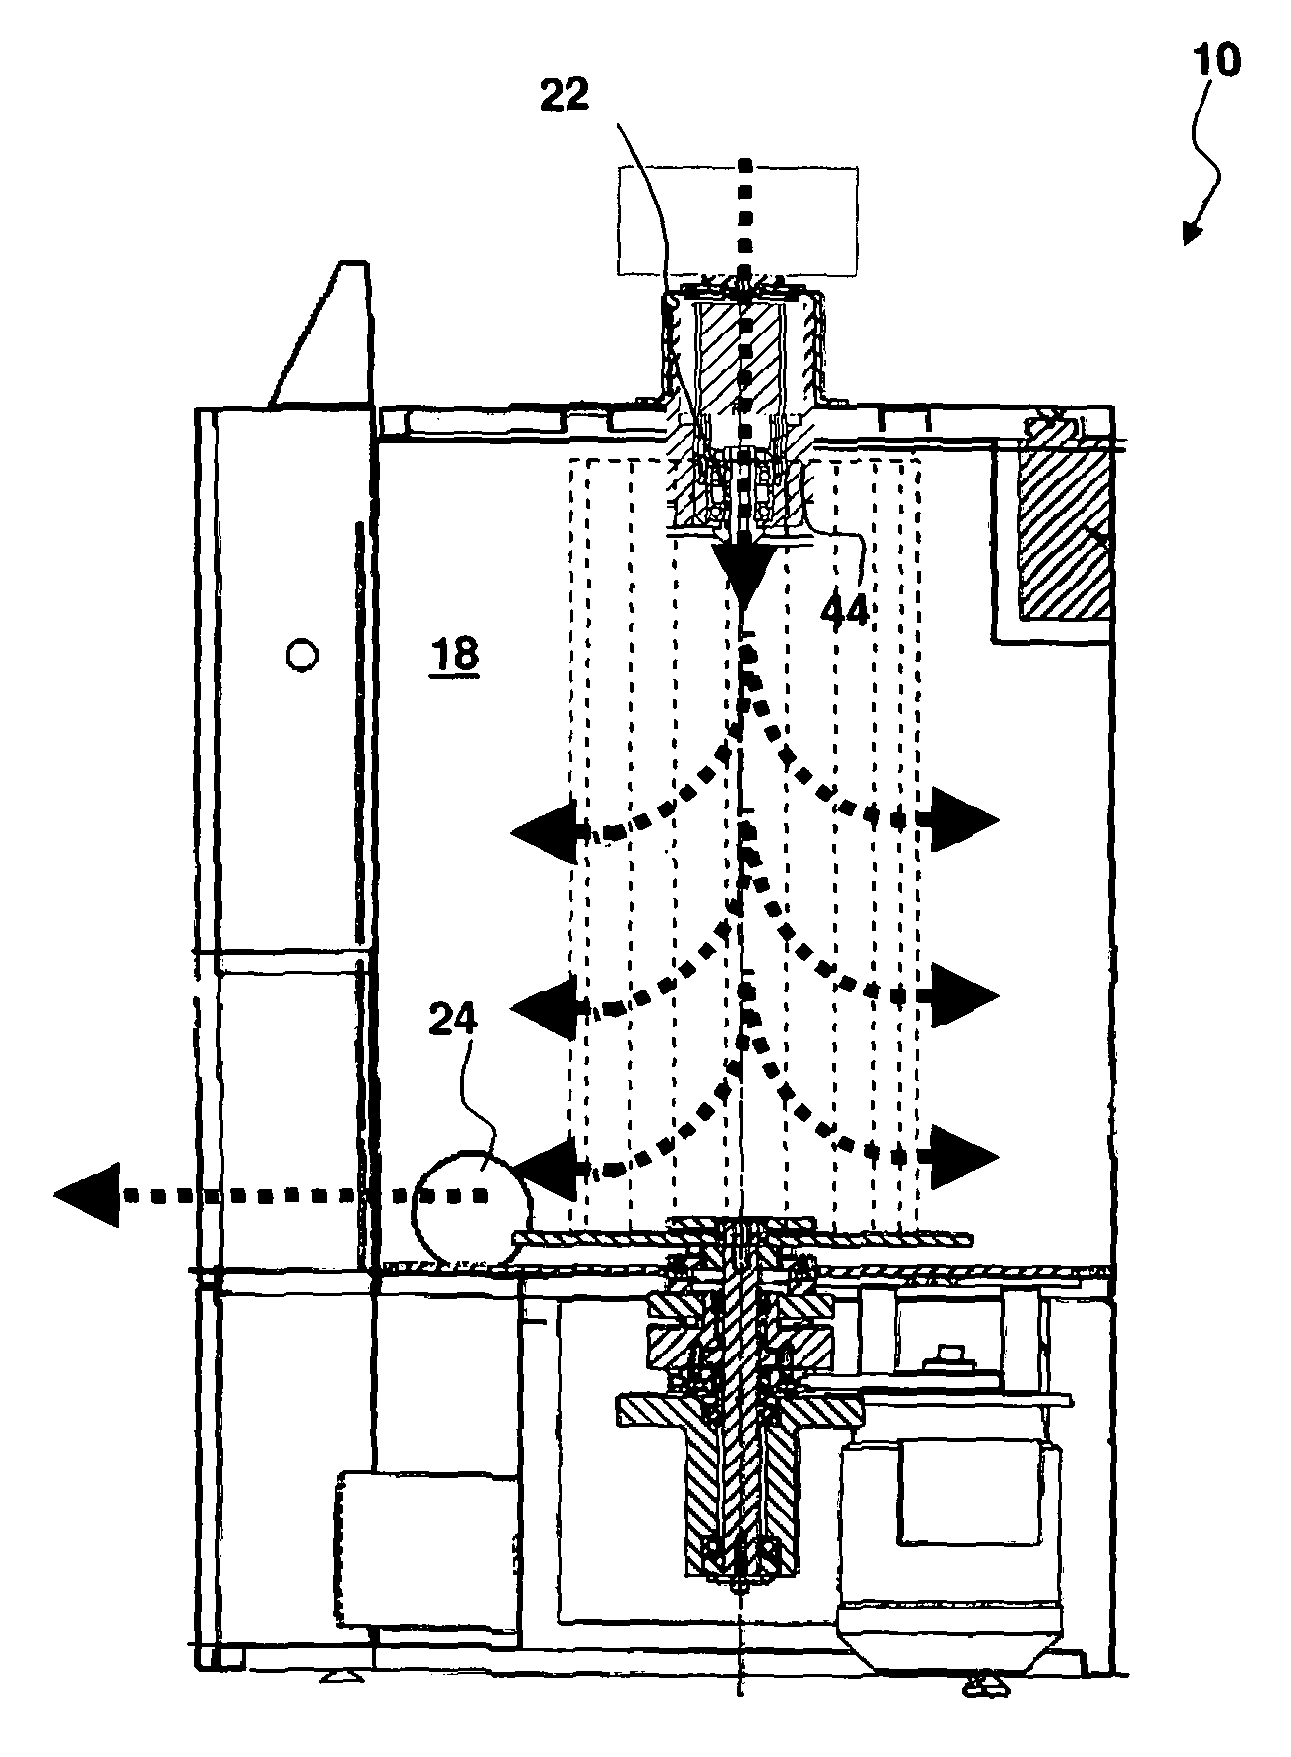 Method and apparatus for cleaning a filter